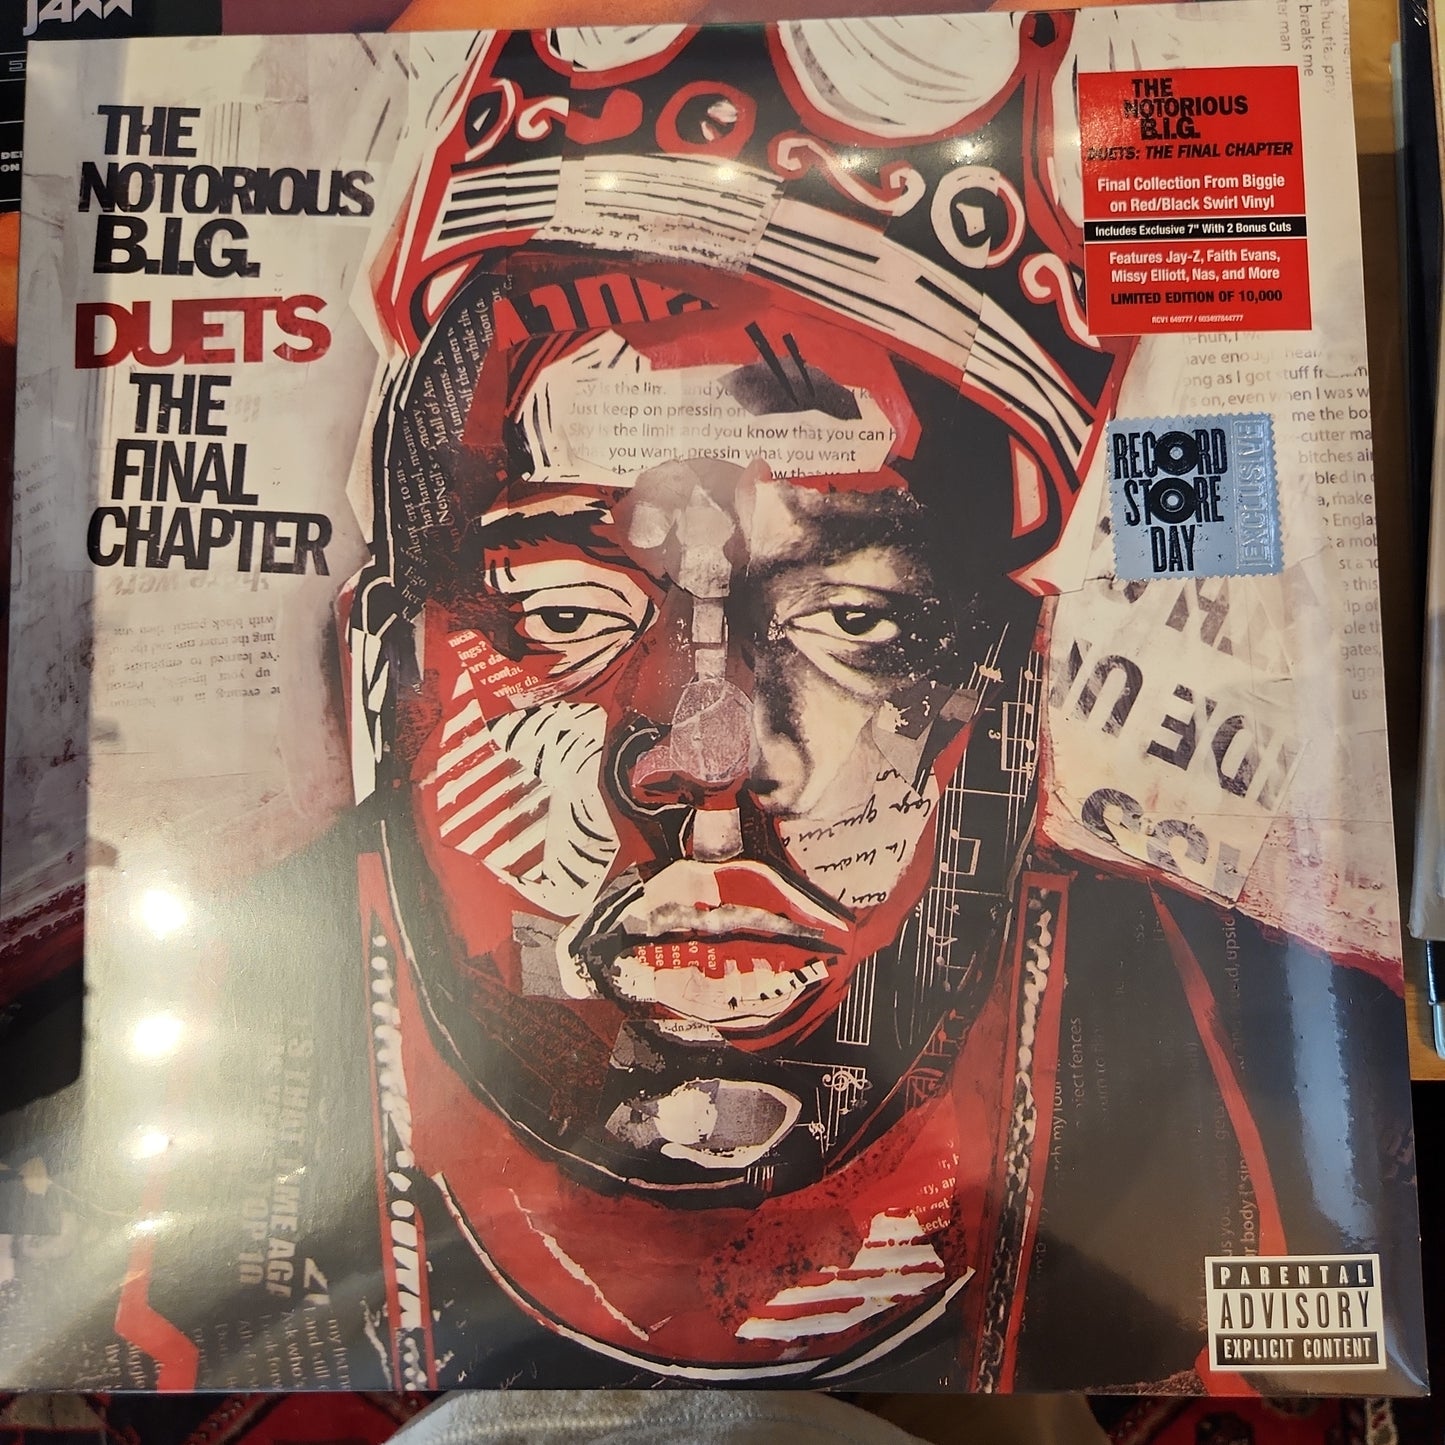 The Notorious B.I.G - Duets: The Final Chapter - Limited Vinyl LP